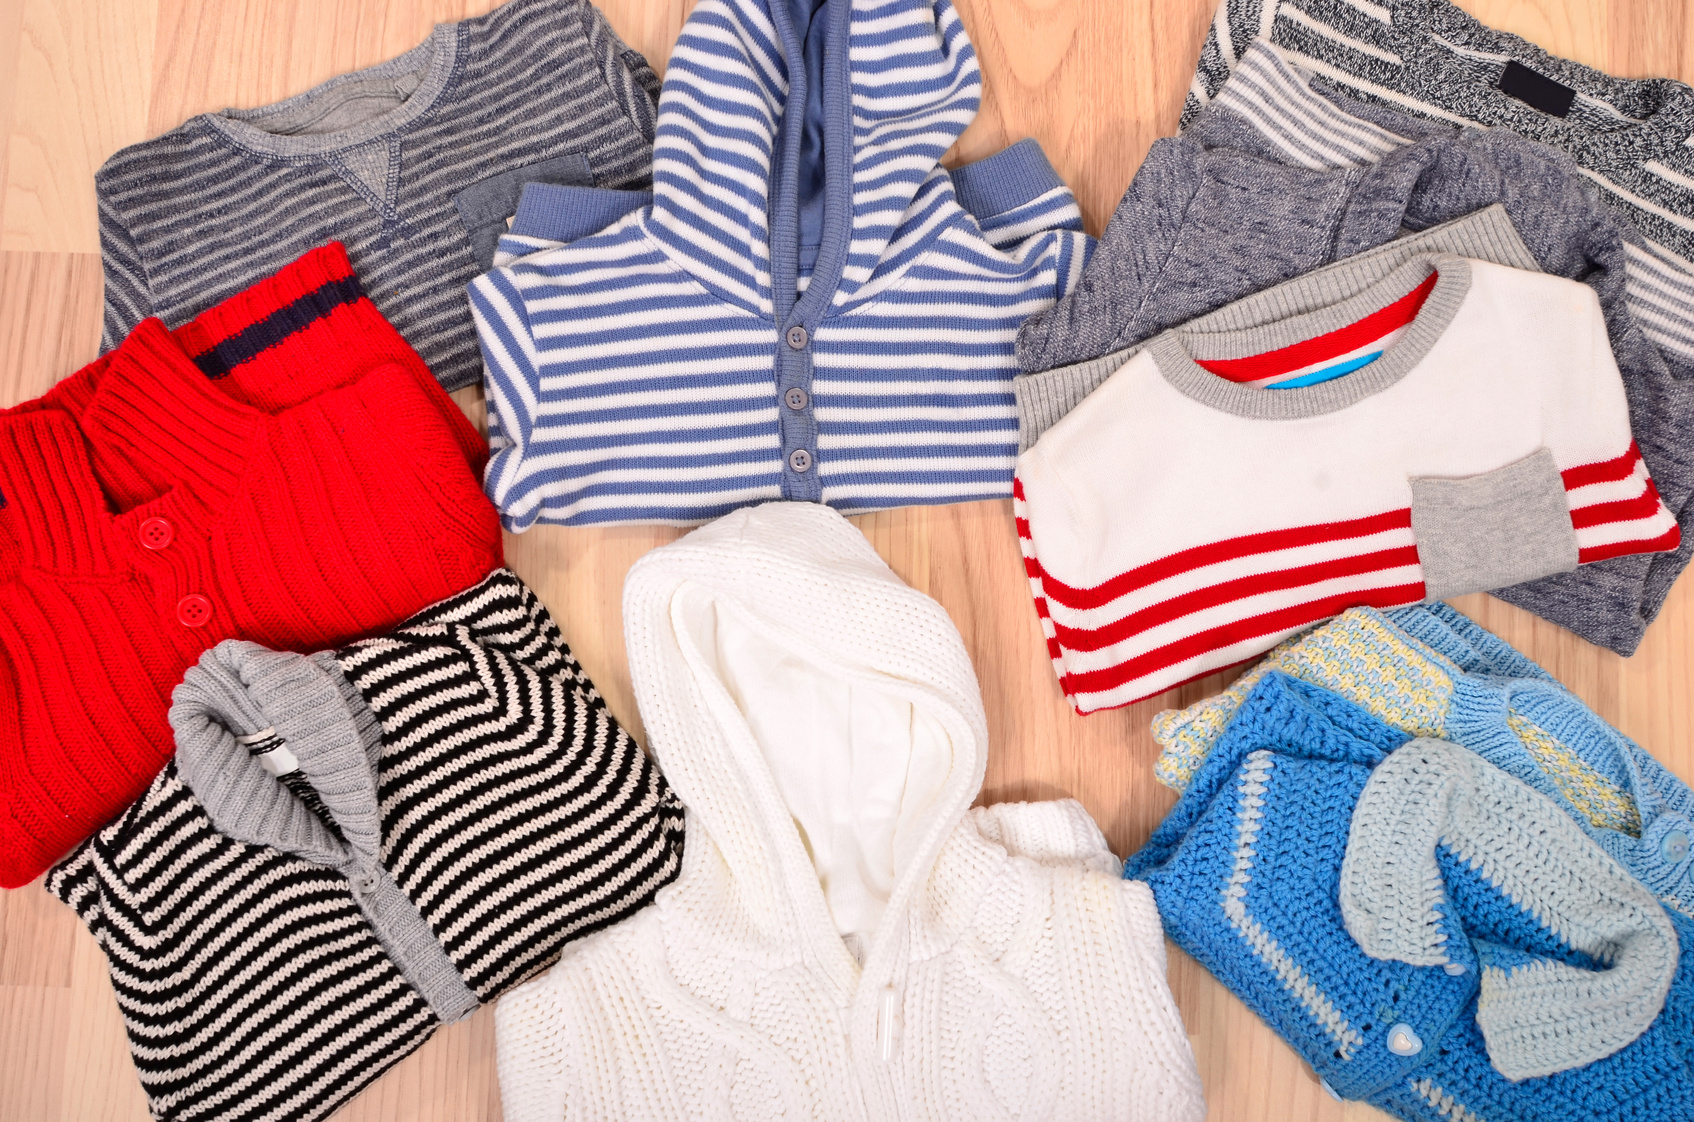 Baby clothes lying on the floor. Winter child sweaters arranged, colorful wardrobe for toddler.